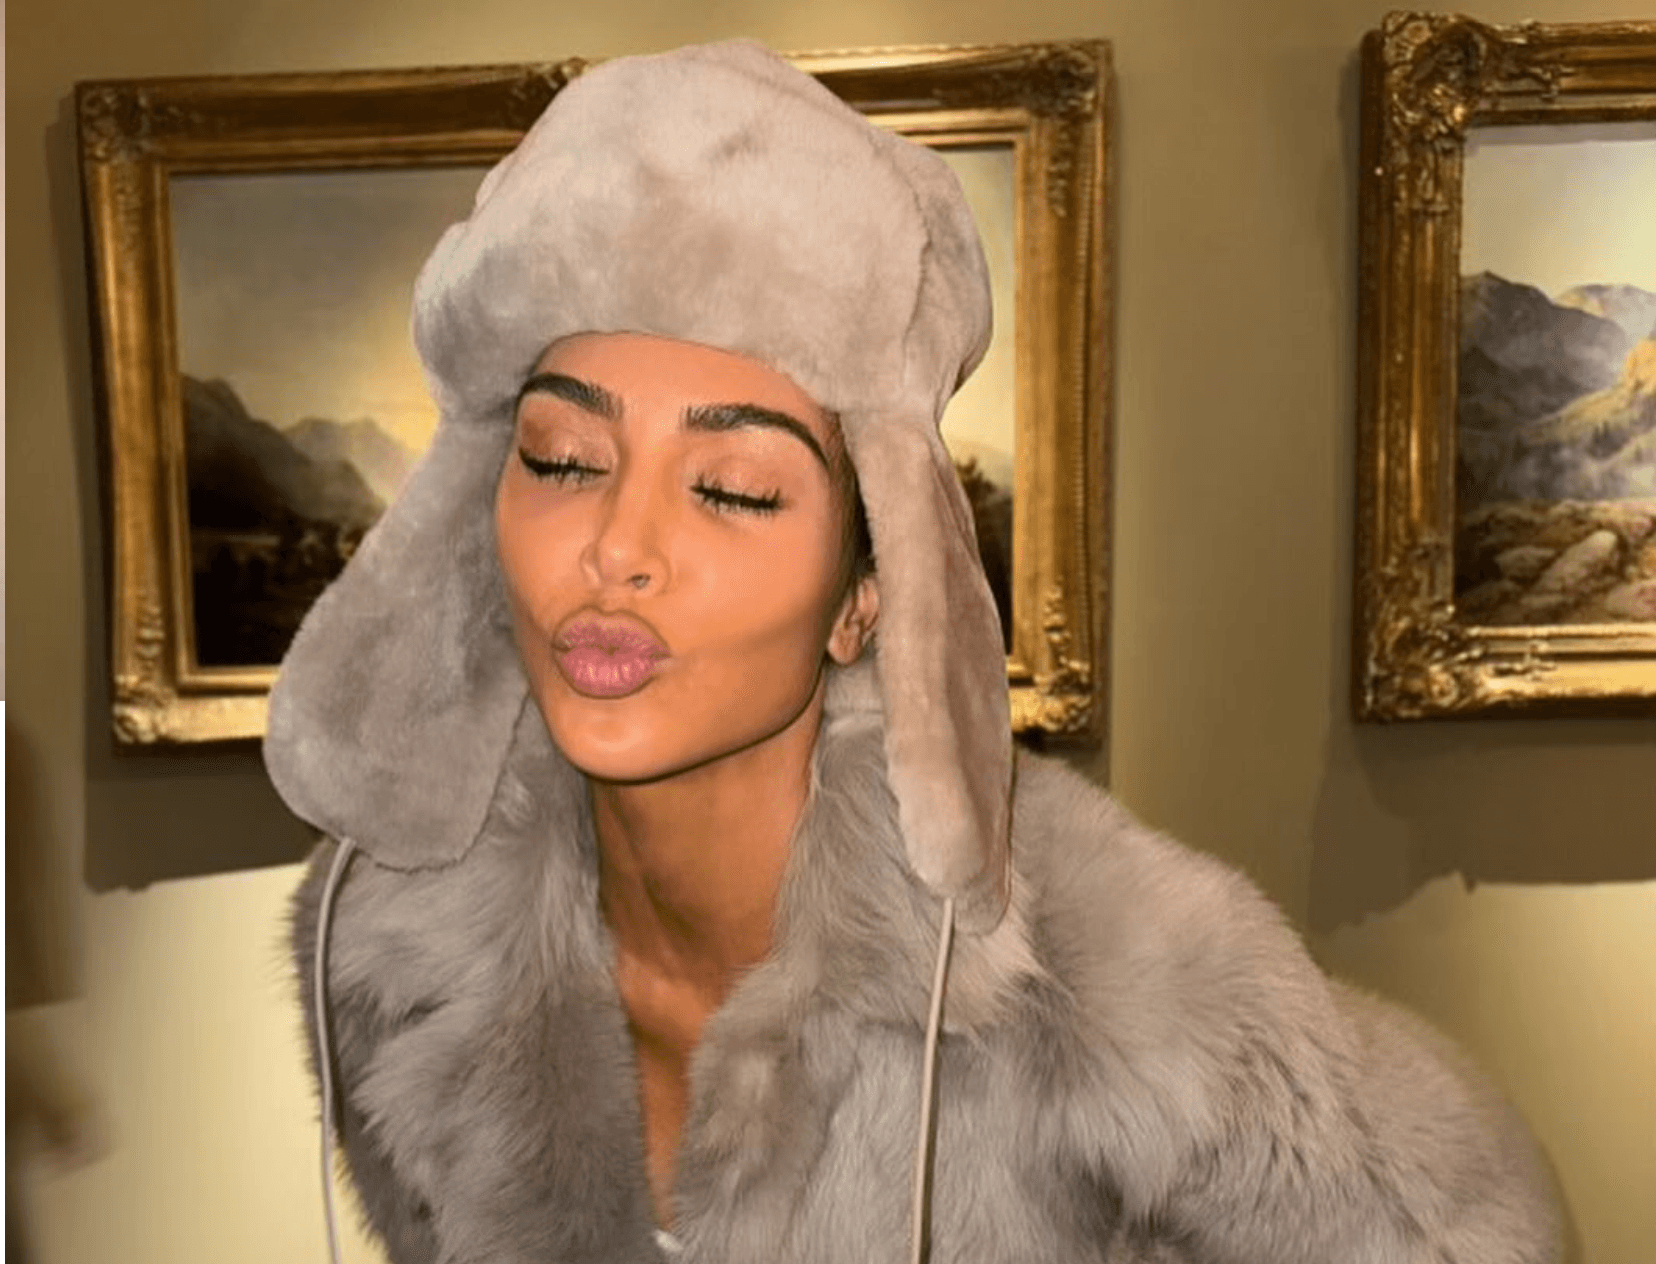 Not Fillers But The Makeup Hack Kim K&#8217;s MUA Uses To Give Her Fuller Lips